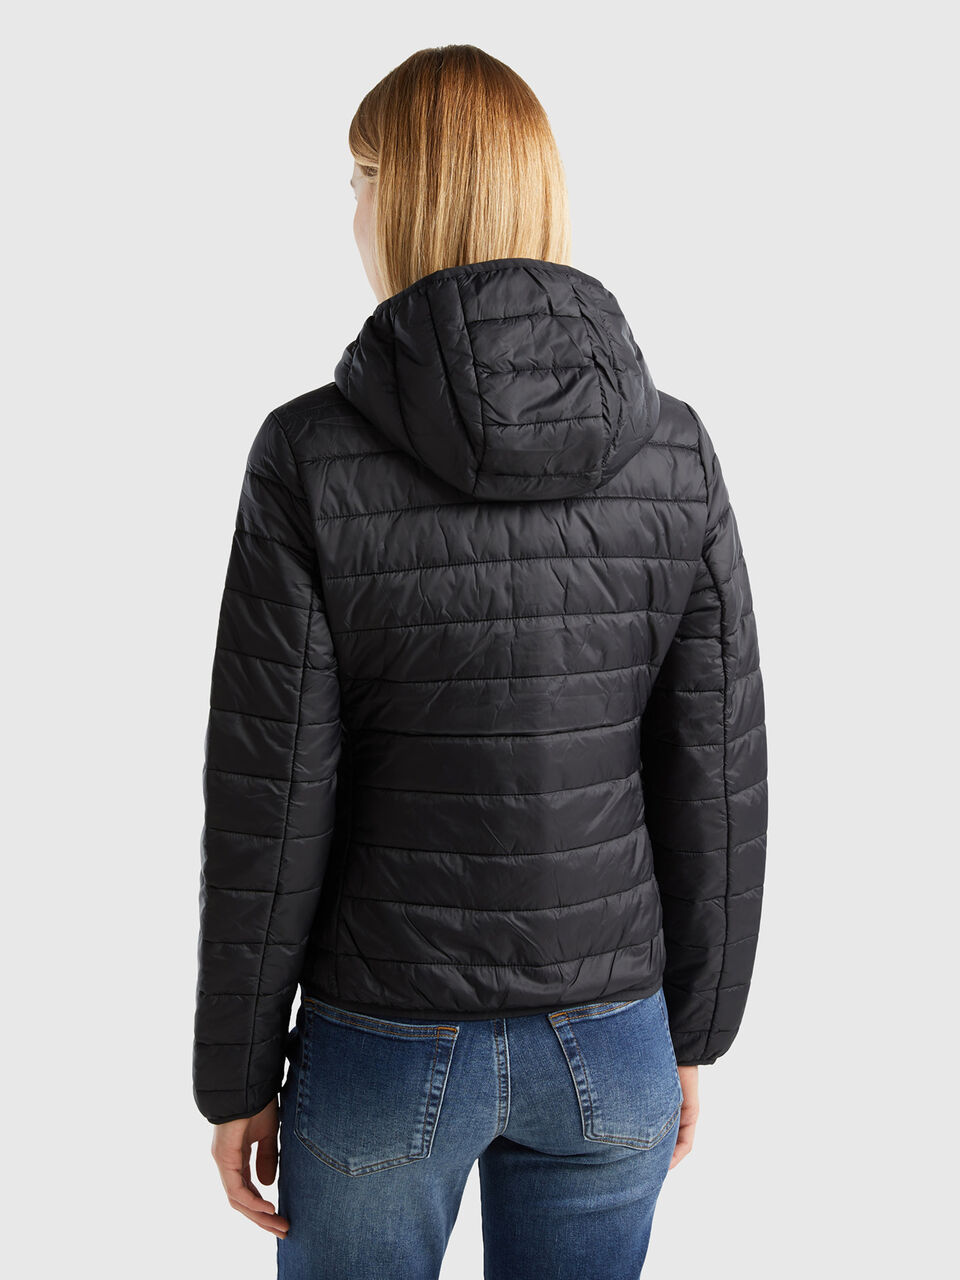 Recycled Relaxed New York Puffer Jacket, Black